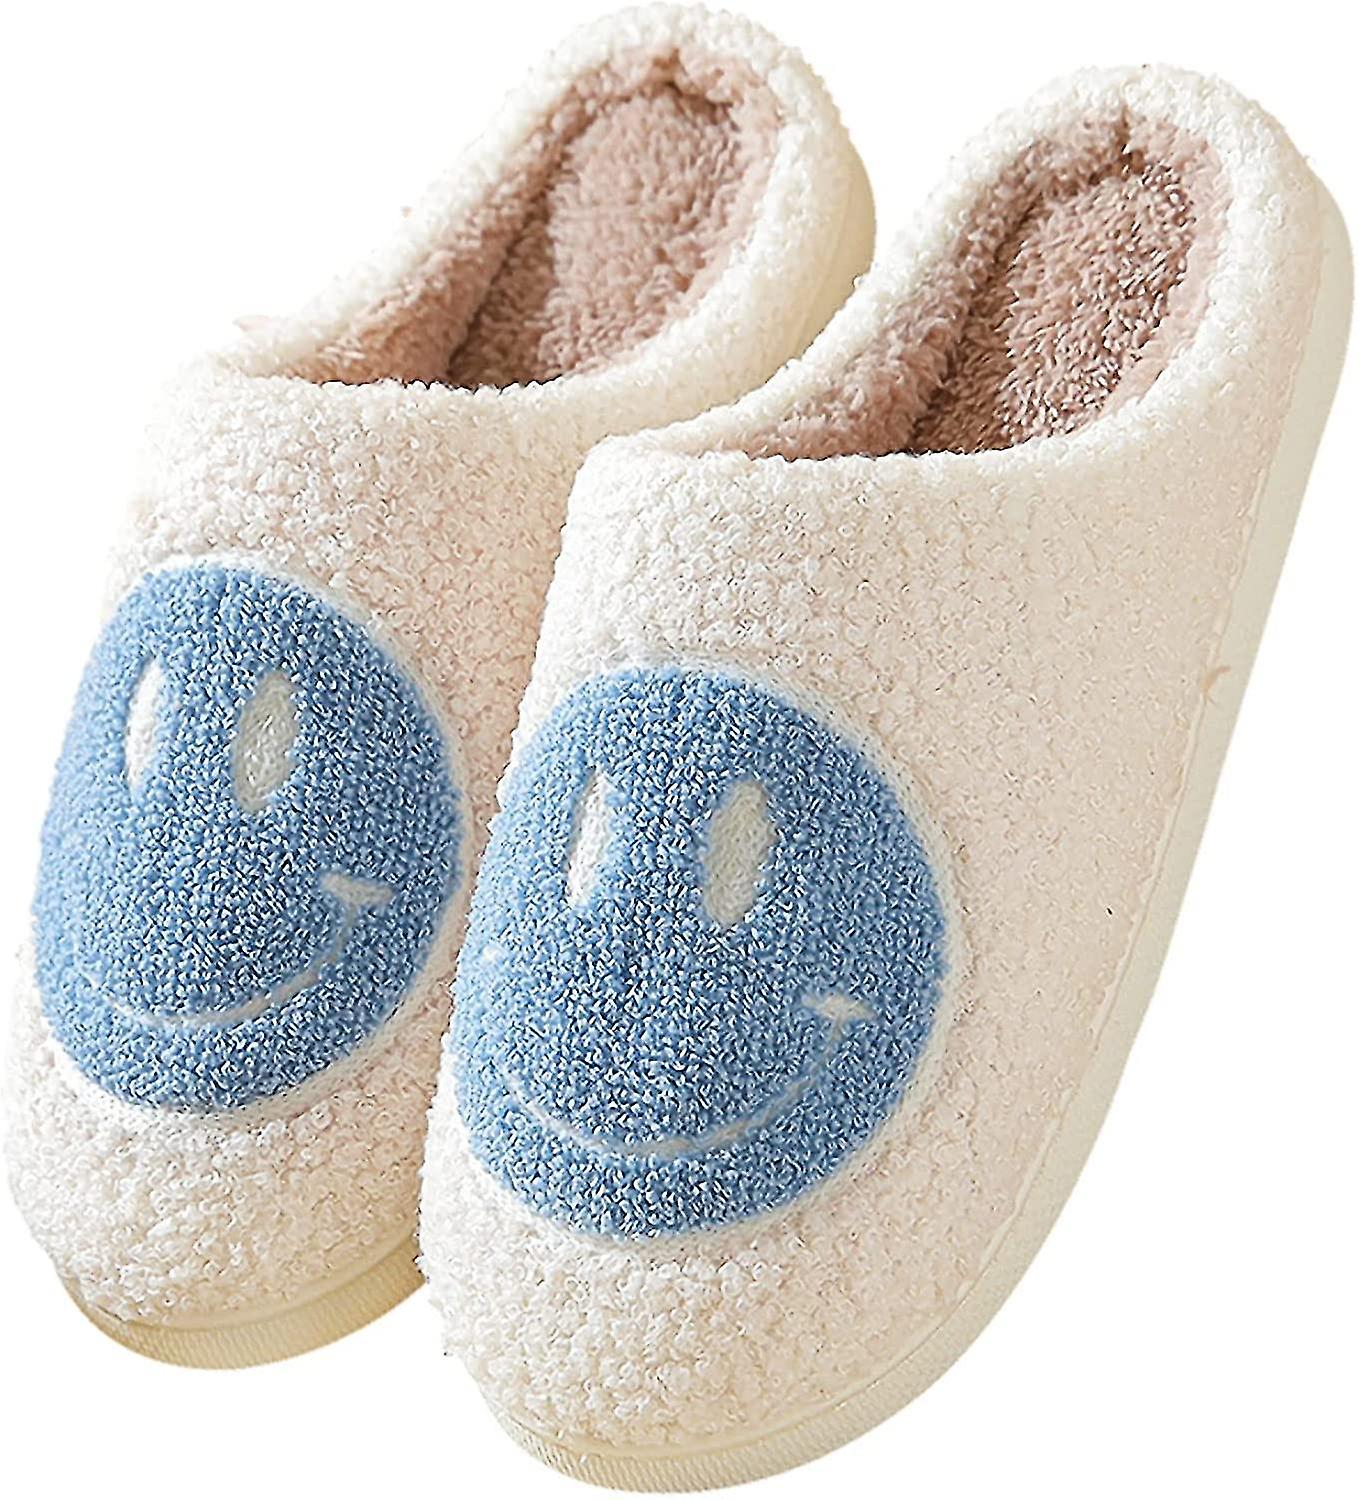 Cheerful and Comfortable Embracing the Joy of Blue Smiley Face Slippers